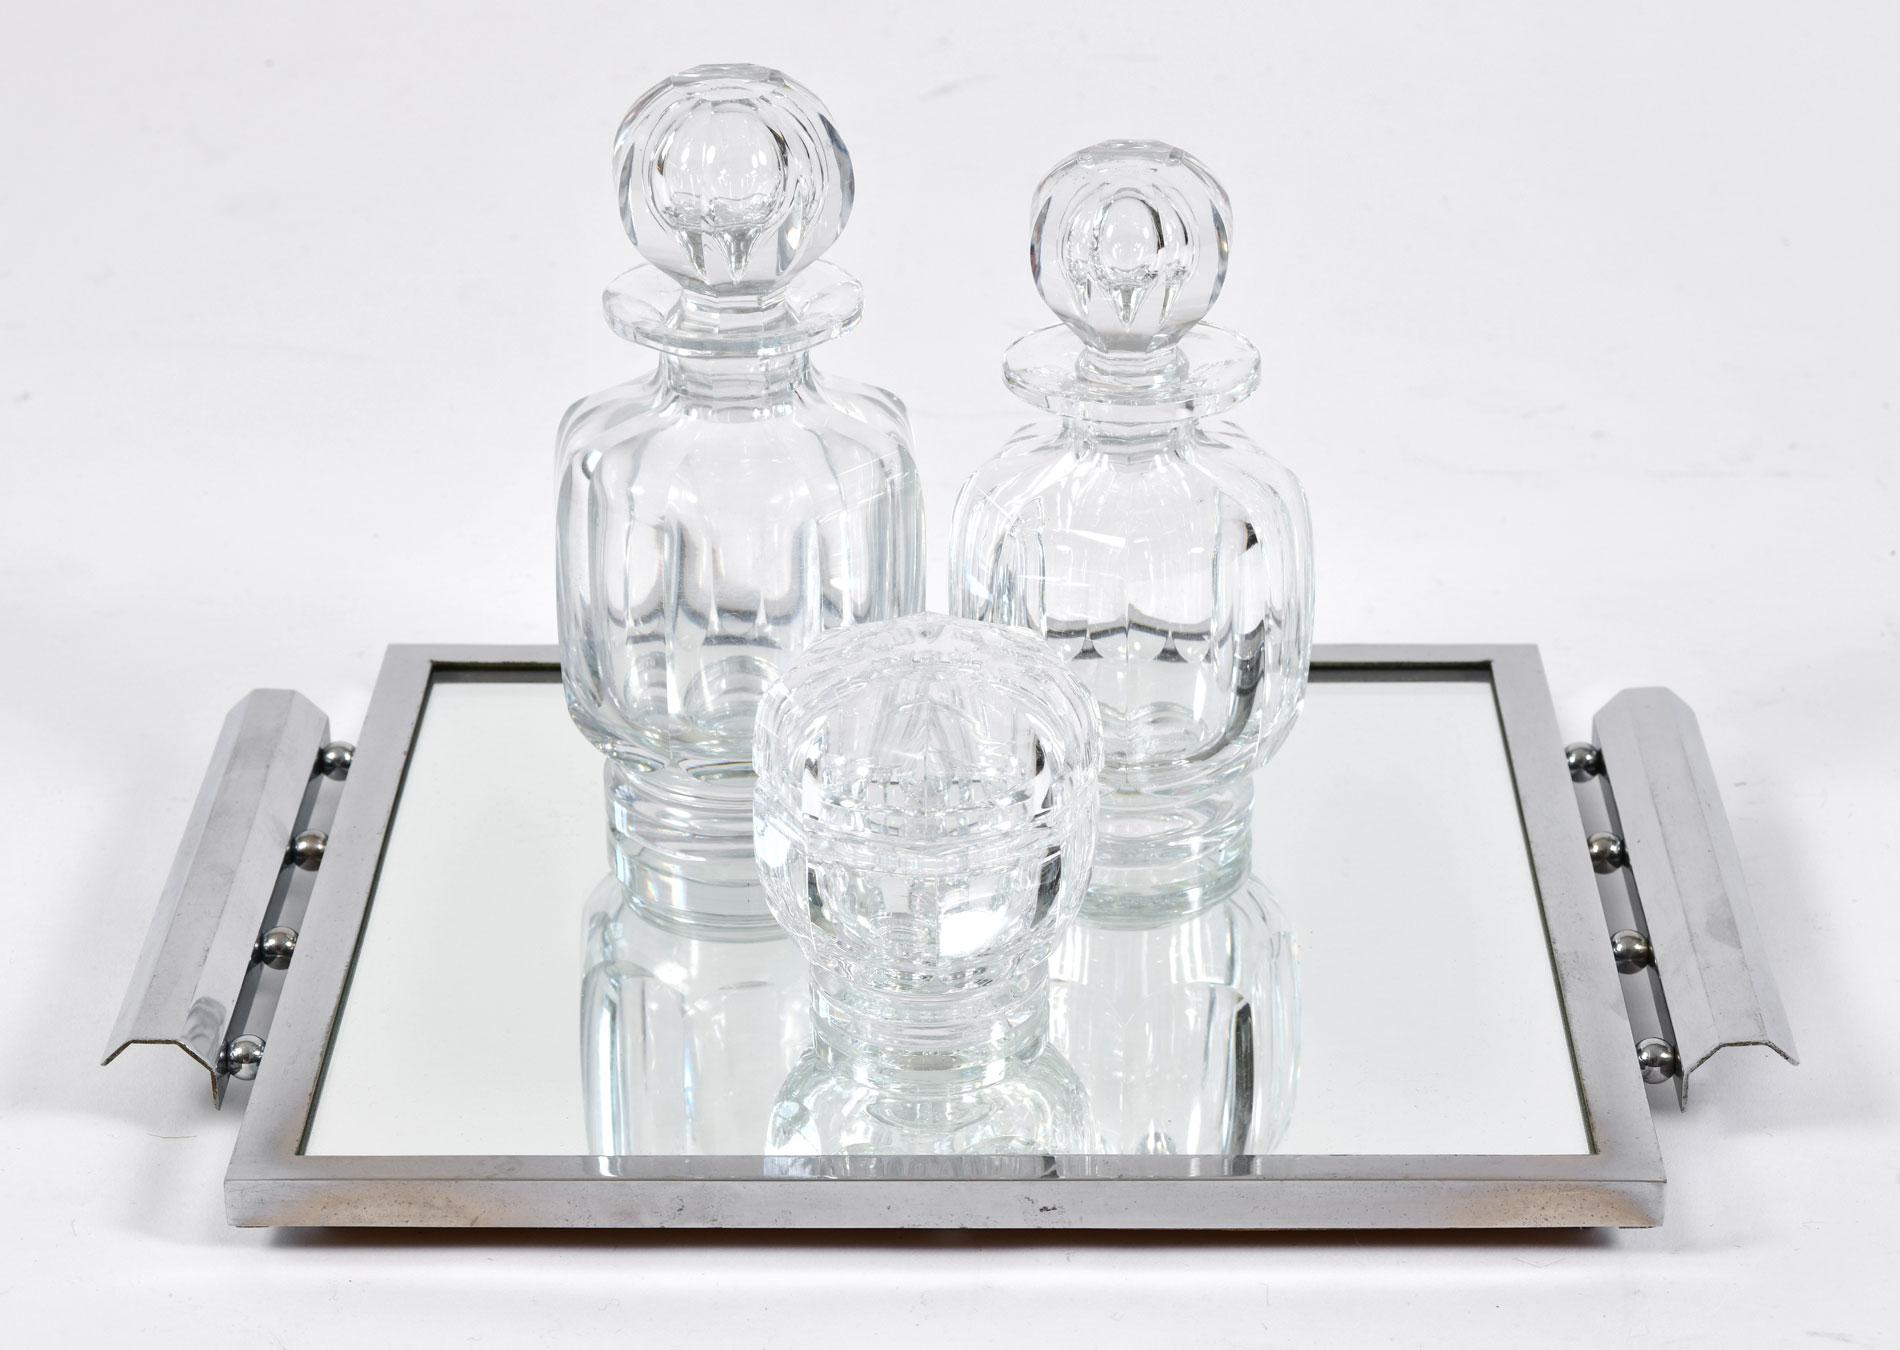 Beautifully shaped Baccarat crystal dressing-table set of three pieces. The faceted crystal bottles with multi-faceted octagonal stoppers are perfect for holding large amounts of perfume. The octagonal crystal lidded pot is perfect for small item